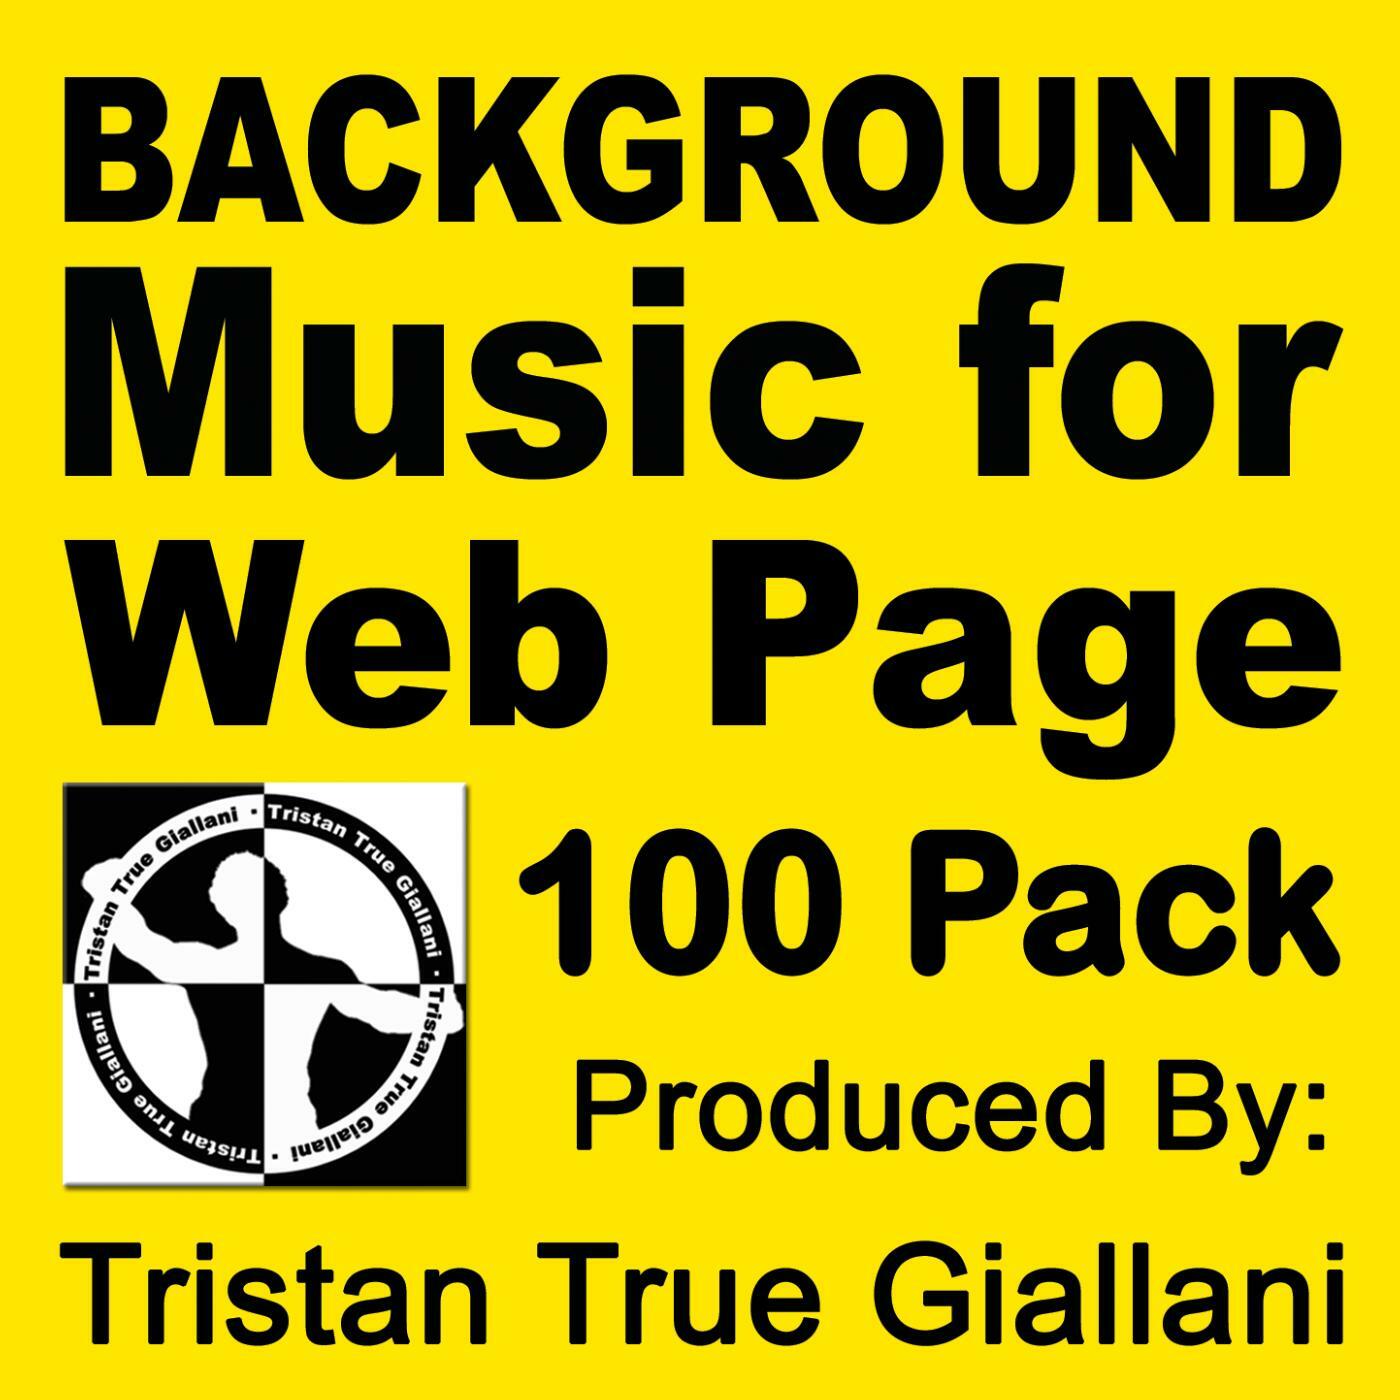 Background Music for Web Page - Background Music for Web Page | iHeartRadio